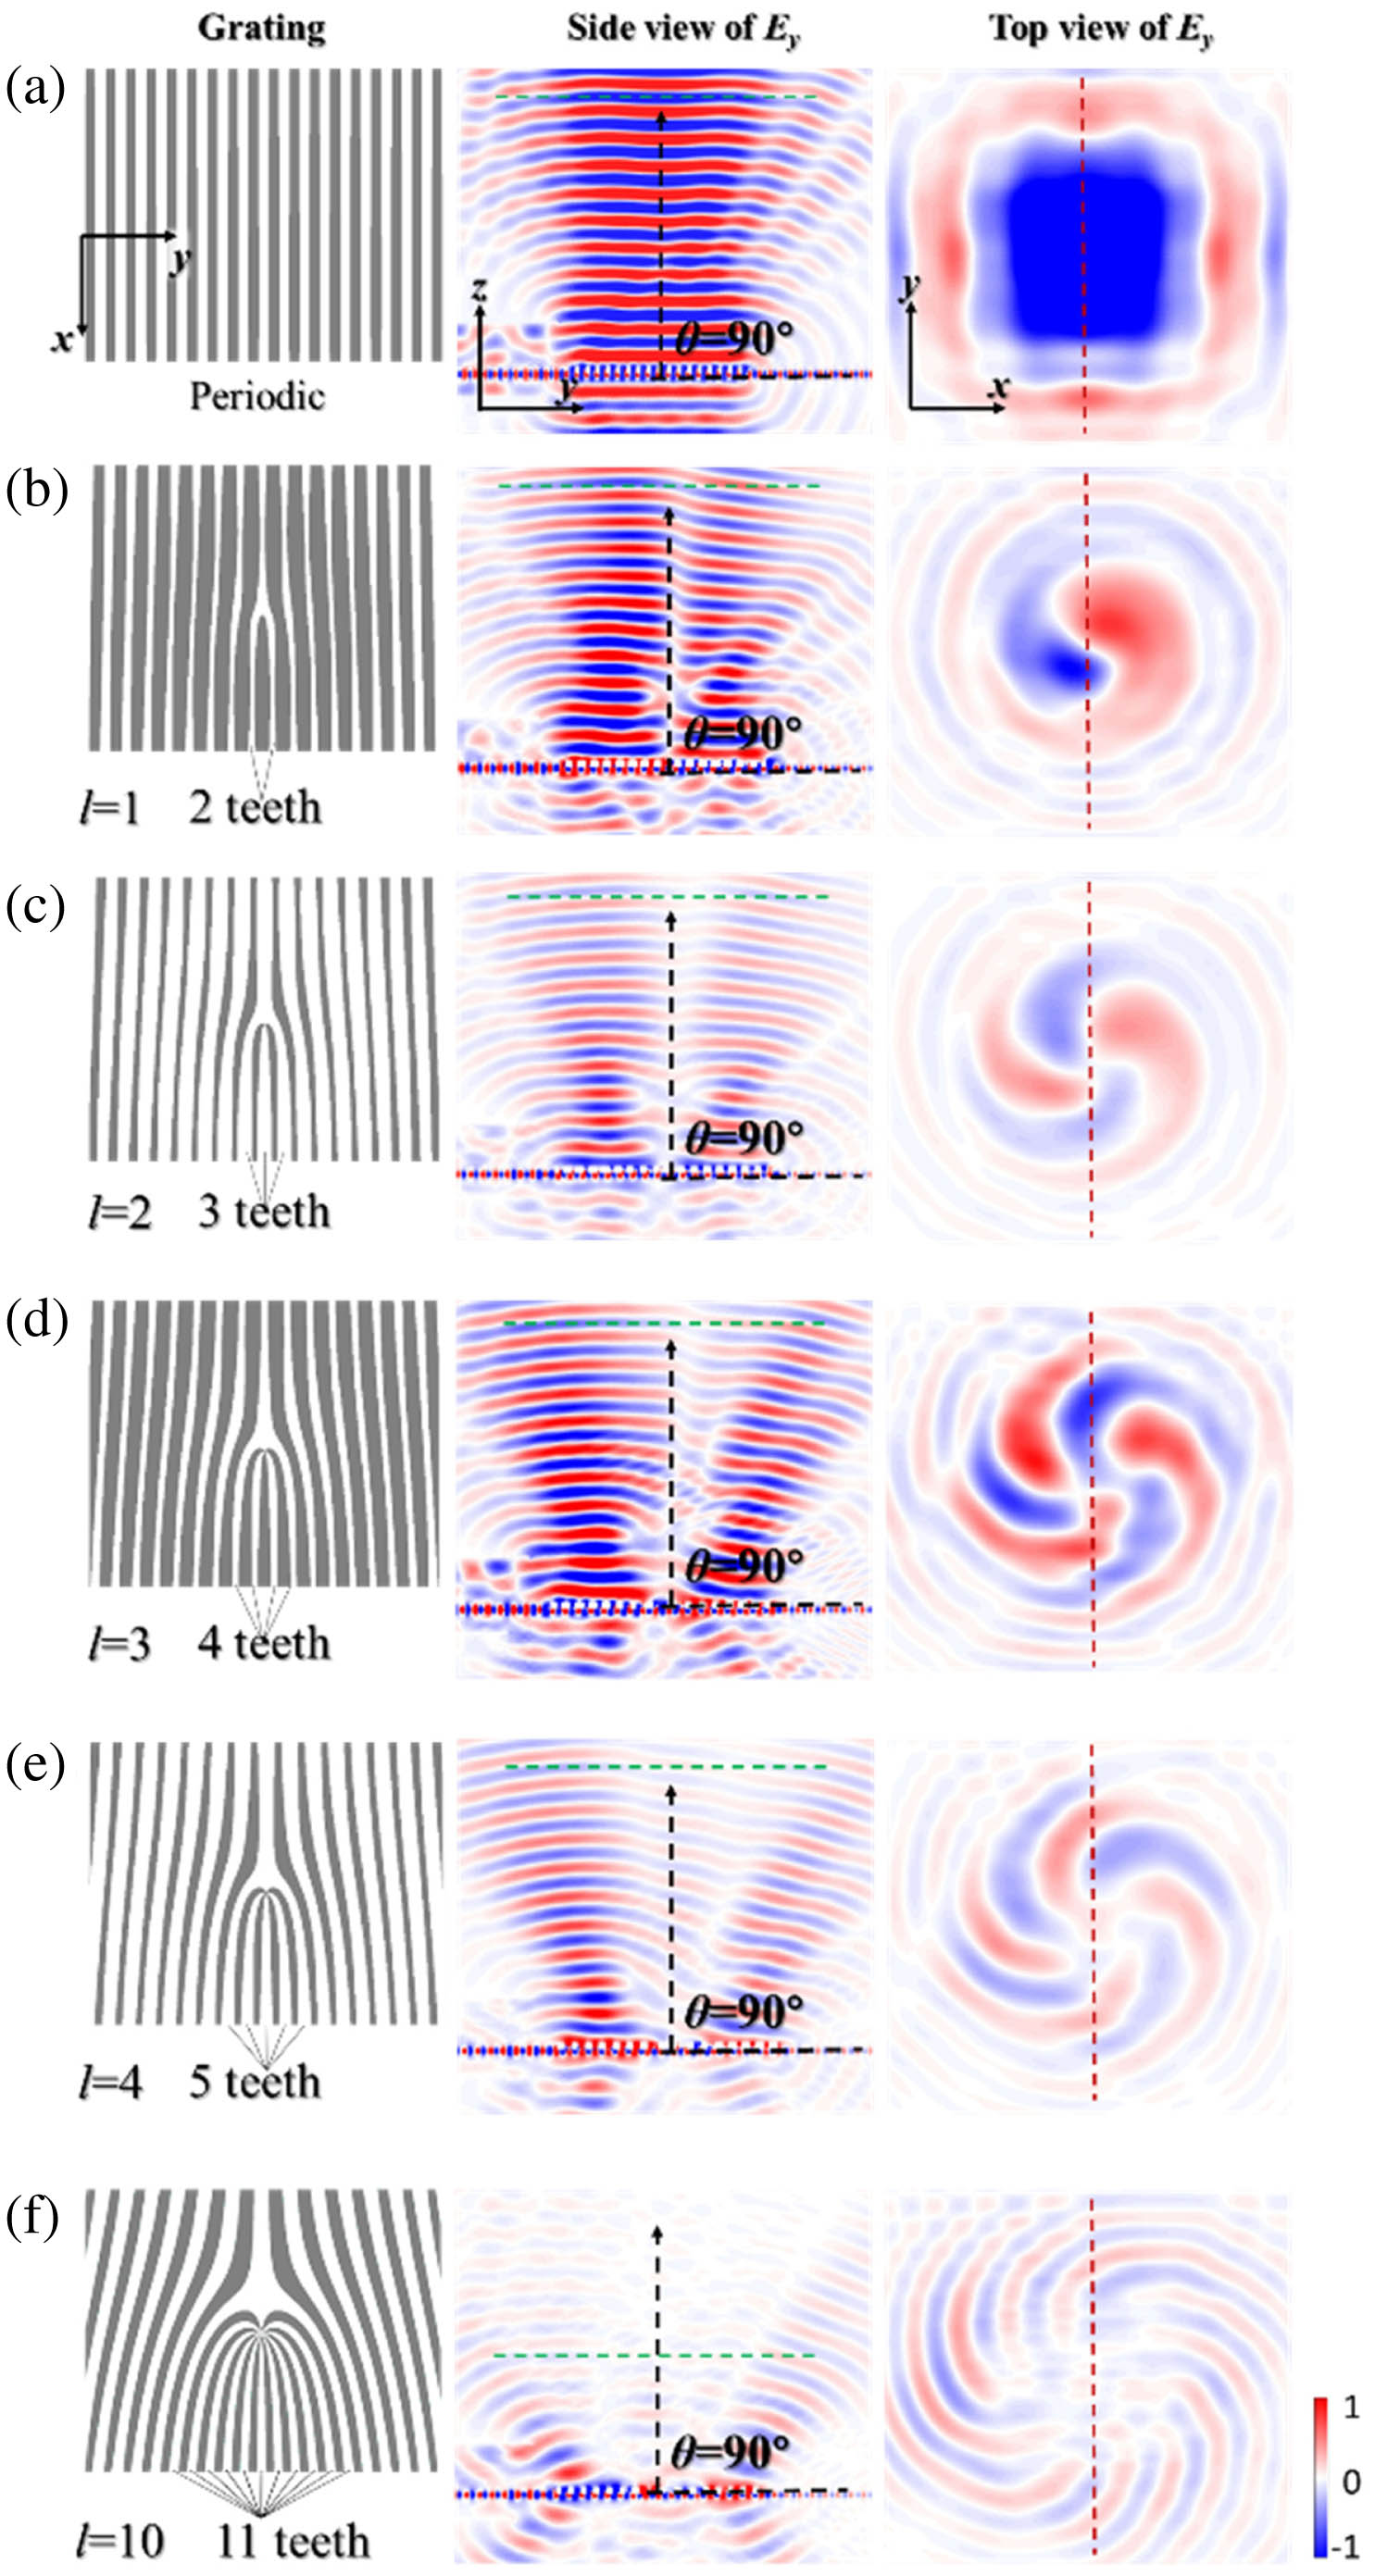 Simulation of a THz OAM wave with TCs of (a) 0 (traditional SPR from periodic grating), (b) 1, (c) 2, (d) 3, (e) 4, and (f) 10. Left: Top view of the gratings (gray part represents PEC, white part represents vacuum), in which the teeth of the fork structures are marked. Middle: Side view of the Ey field (Ey in the y–z plane, the observation planes are shown as red-dashed lines in the right colomn) of the OAM wave with different TCs. The radiation angle is about 90°, and the vortex wave propagates along the z direction. Right: Top view (the observation planes are shown as green-dashed lines in the middle column) of the Ey field above the grating, which clearly shows the vortex shape and the phase change of l×2π (l=0,1,2,3,4, and 10) with φ varying 2π.